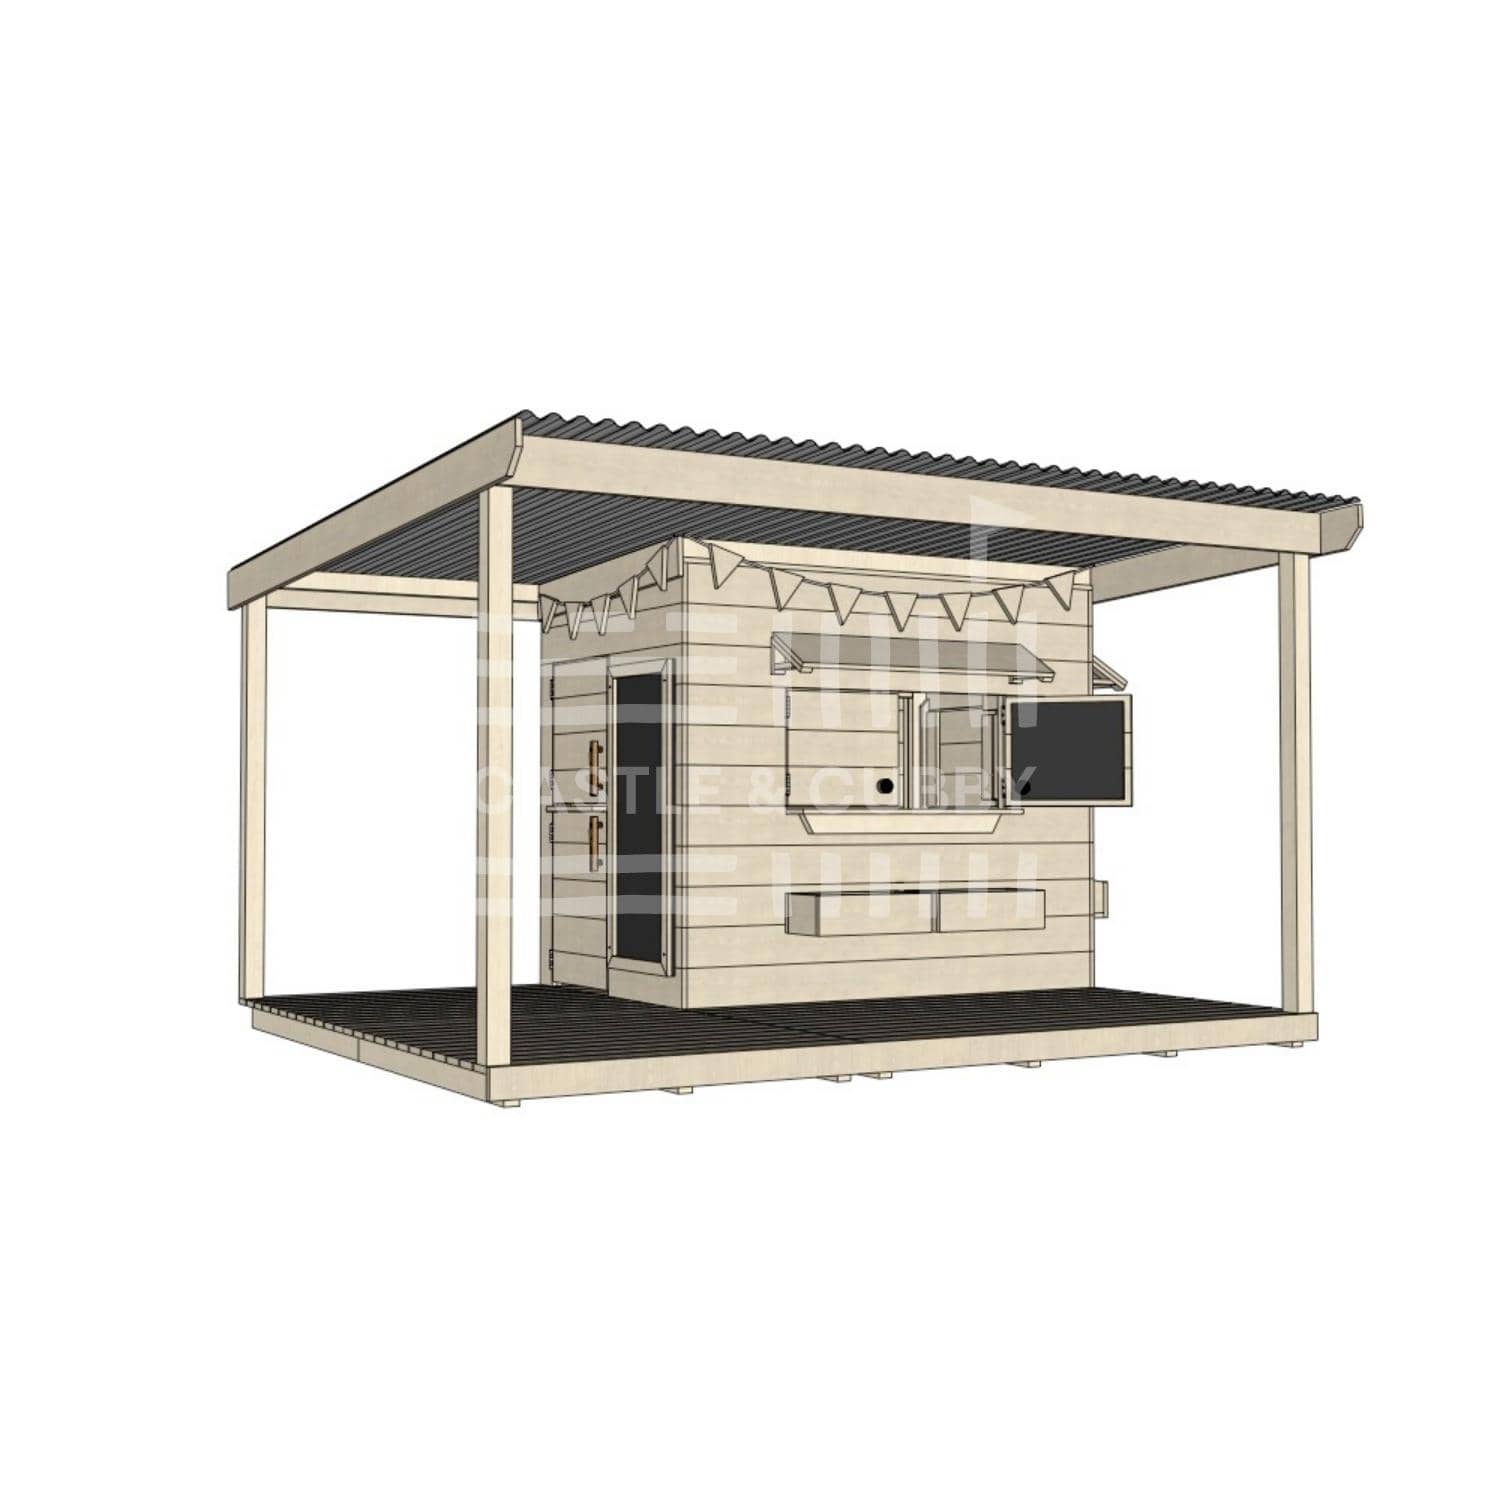 Raw wooden cubby house with wraparound porch for residential and family homes little rectangle size with accessories